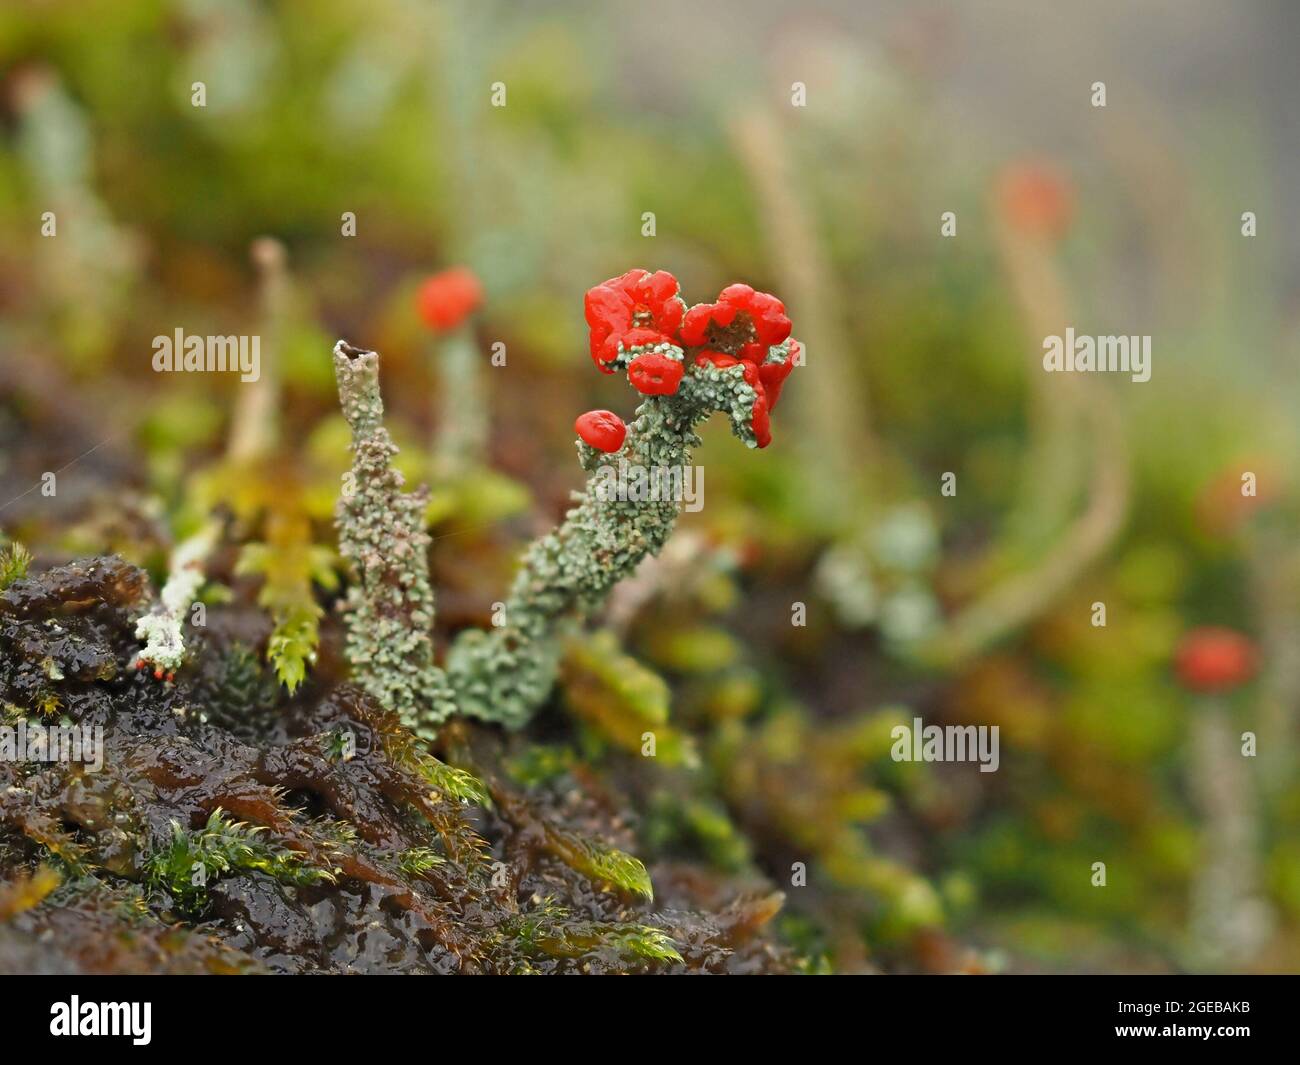 tiny world - fantastic red fruiting bodies of Cladonia cristatella – British soldiers lichen on grey frilly stalks  in Cumbria England UK Stock Photo